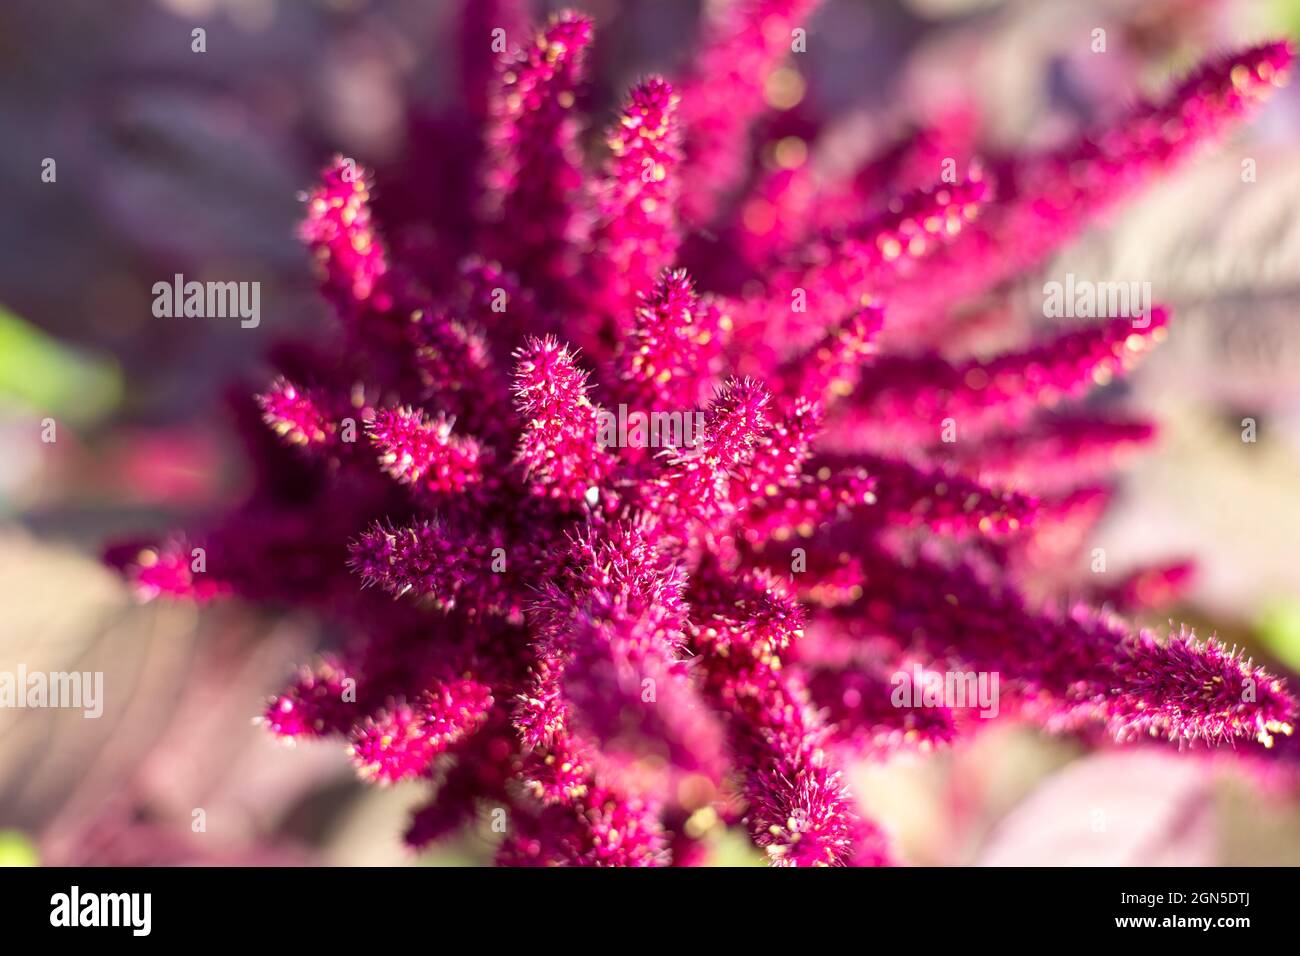 Vegetable amaranth flower with seeds, top view, blurred focus. Growing and caring for plants. Stock Photo